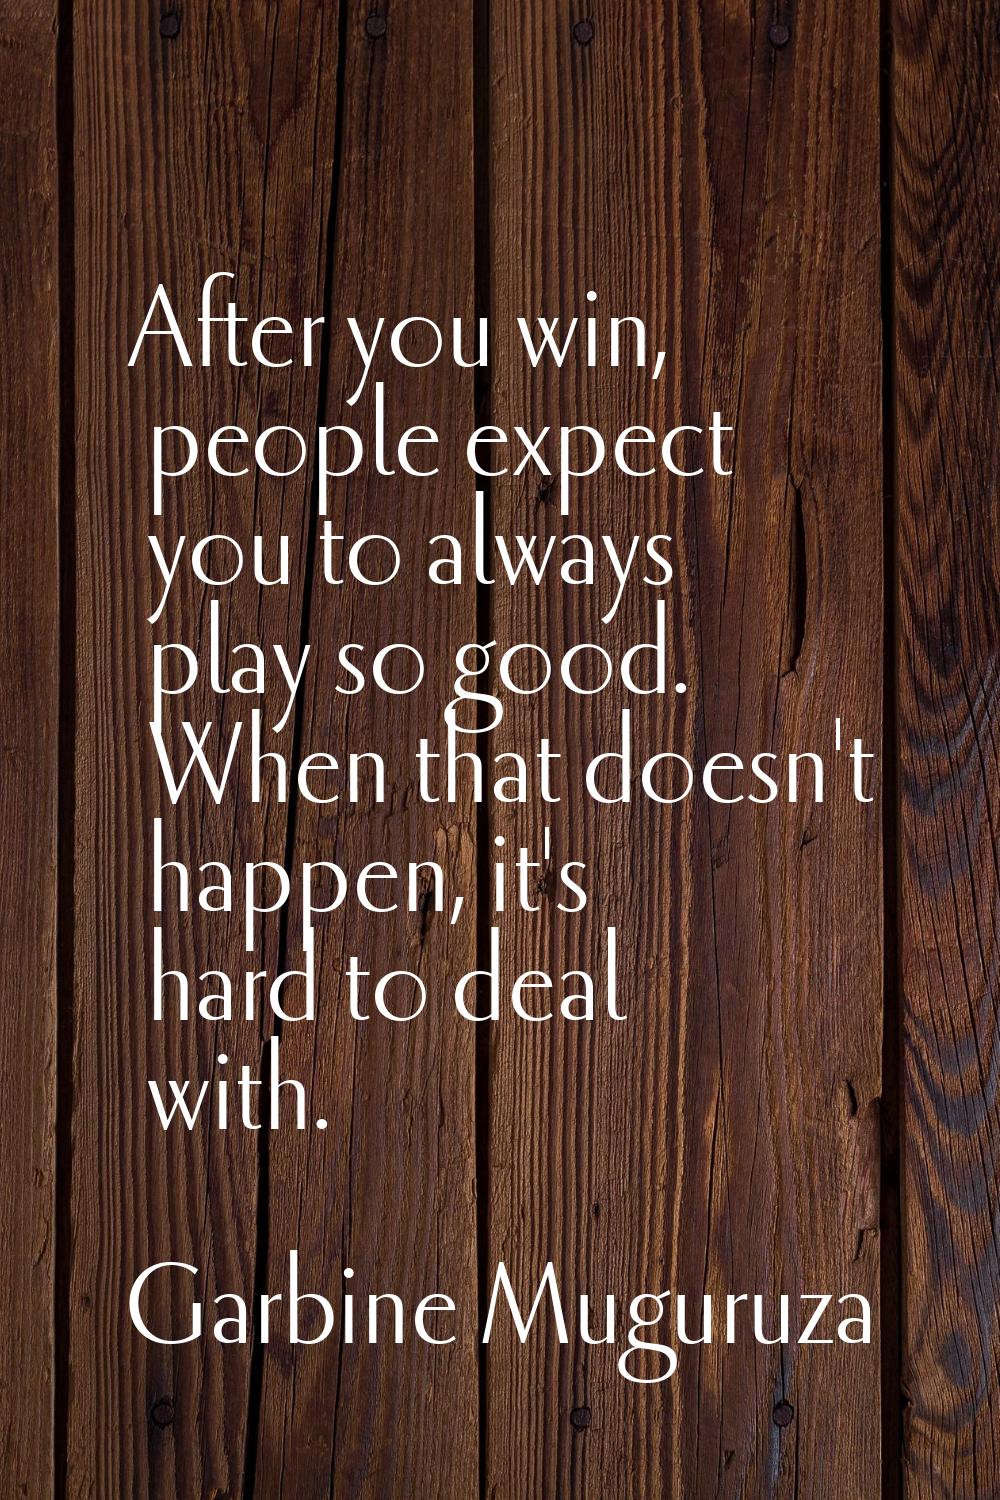 After you win, people expect you to always play so good. When that doesn't happen, it's hard to dea